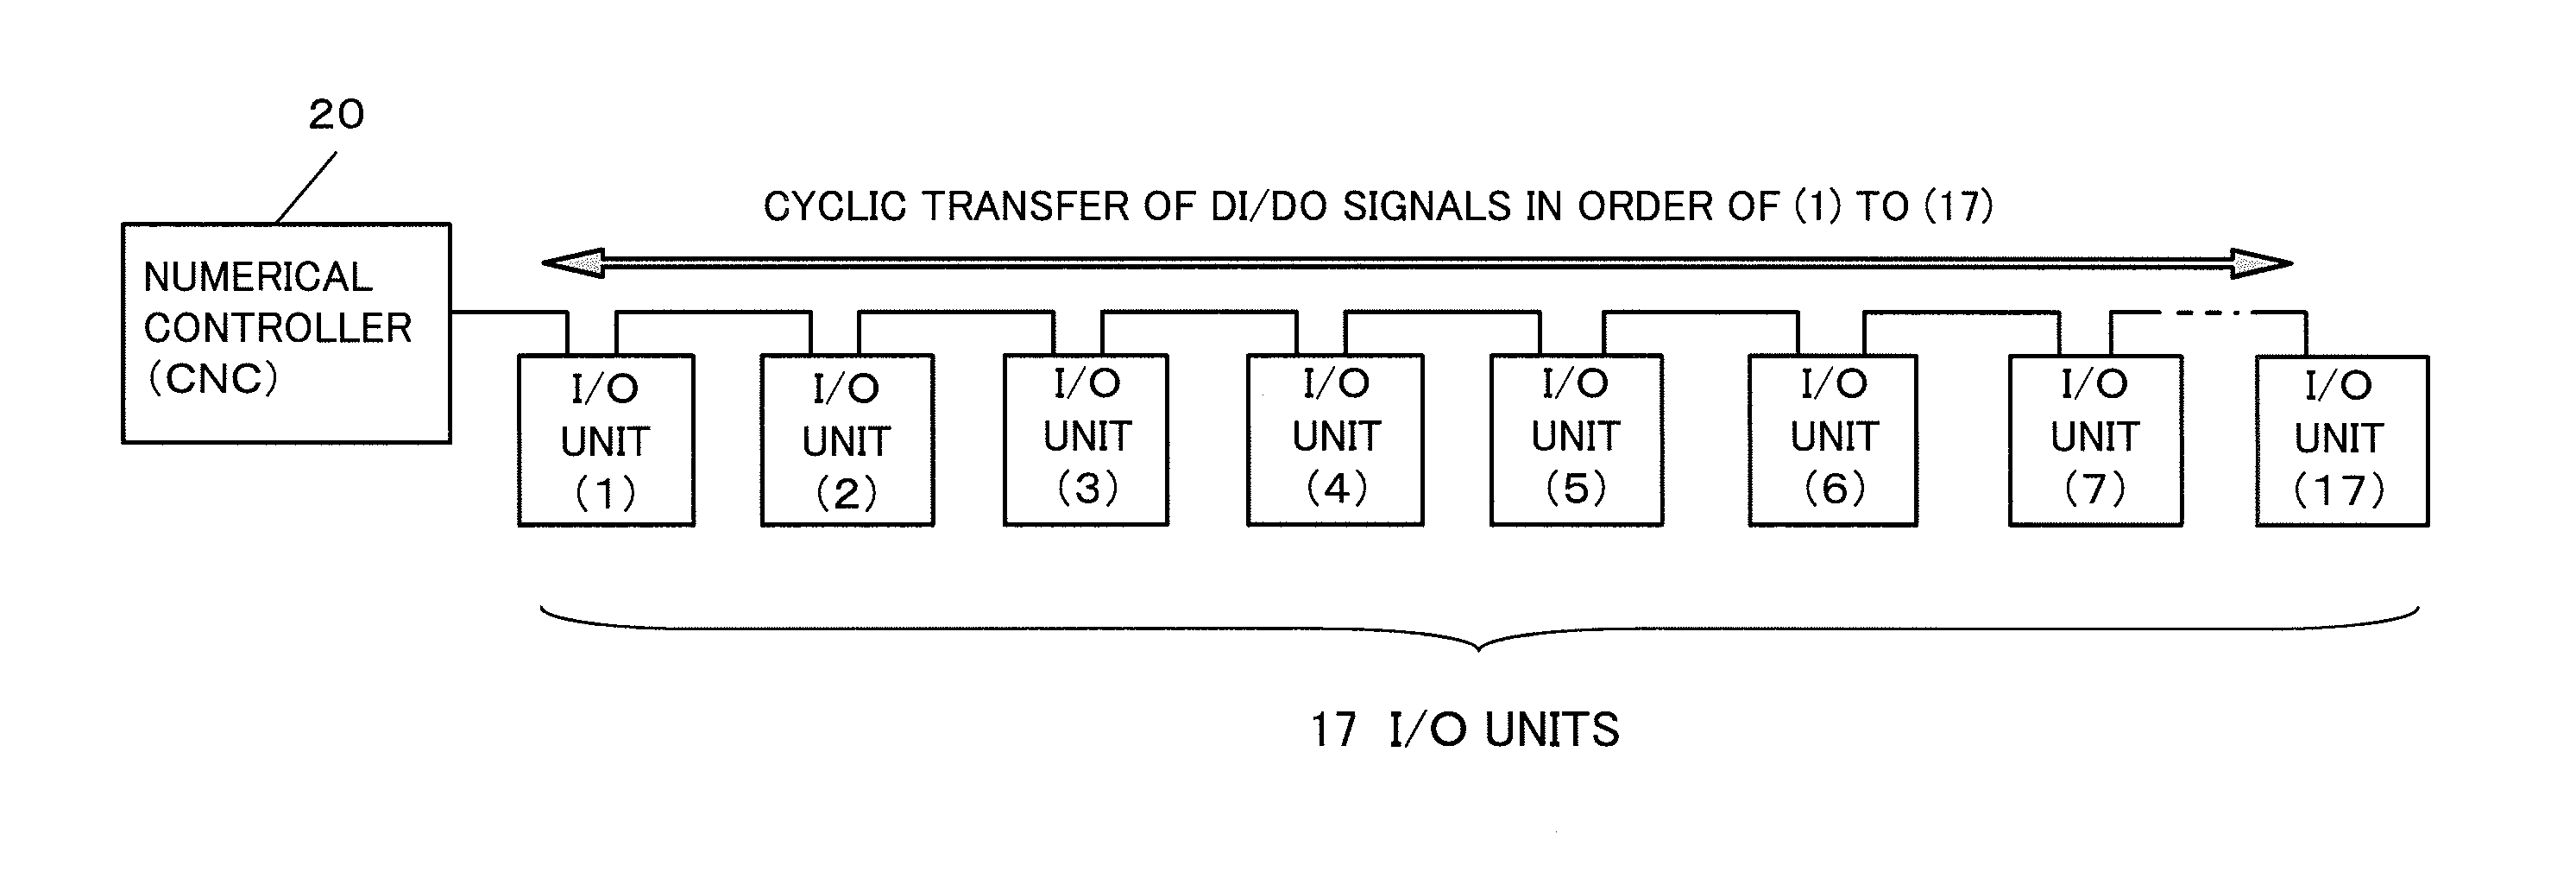 Numerical controller for communication with I/O units